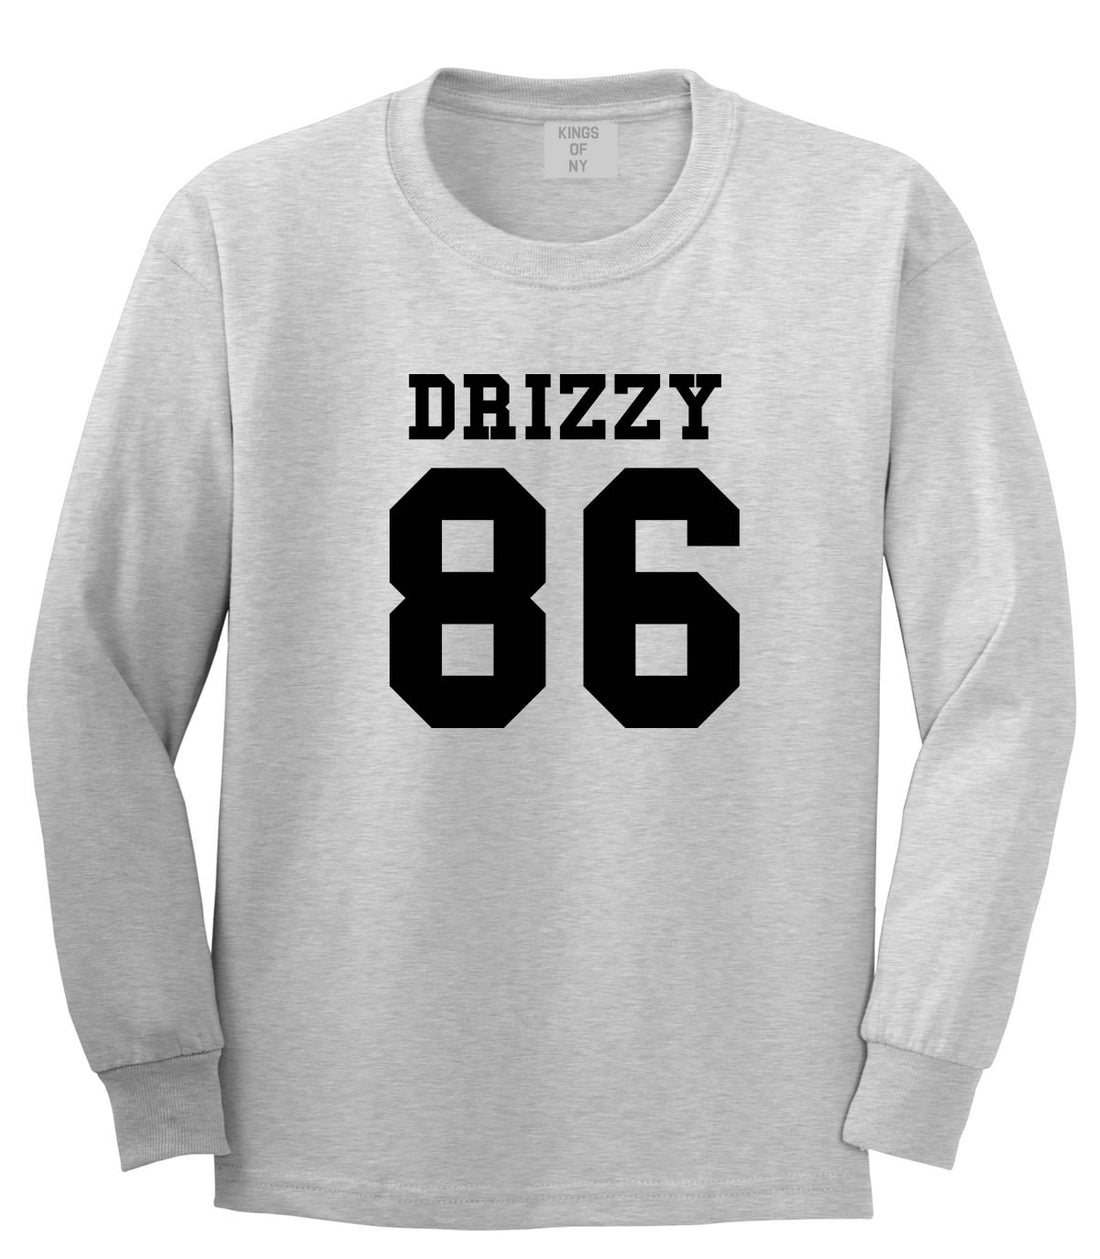 Drizzy 86 Team Jersey Long Sleeve T-Shirt in Grey by Kings Of NY